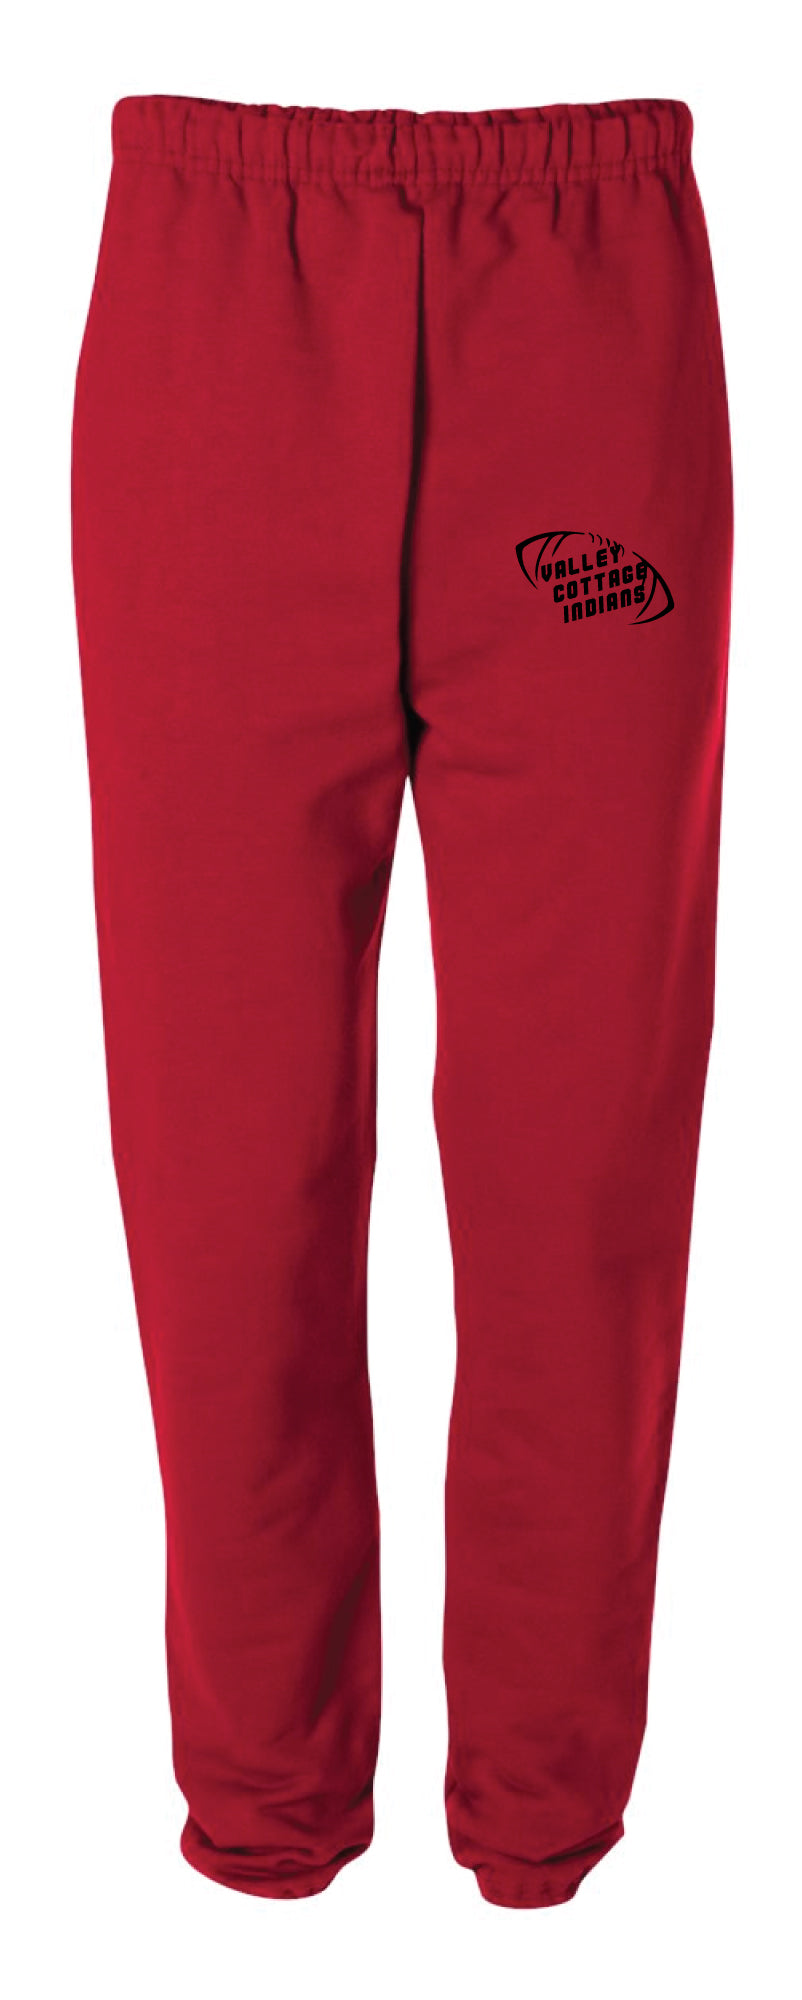 VCI Youth Football Cotton Sweatpants - Red - 5KounT2018